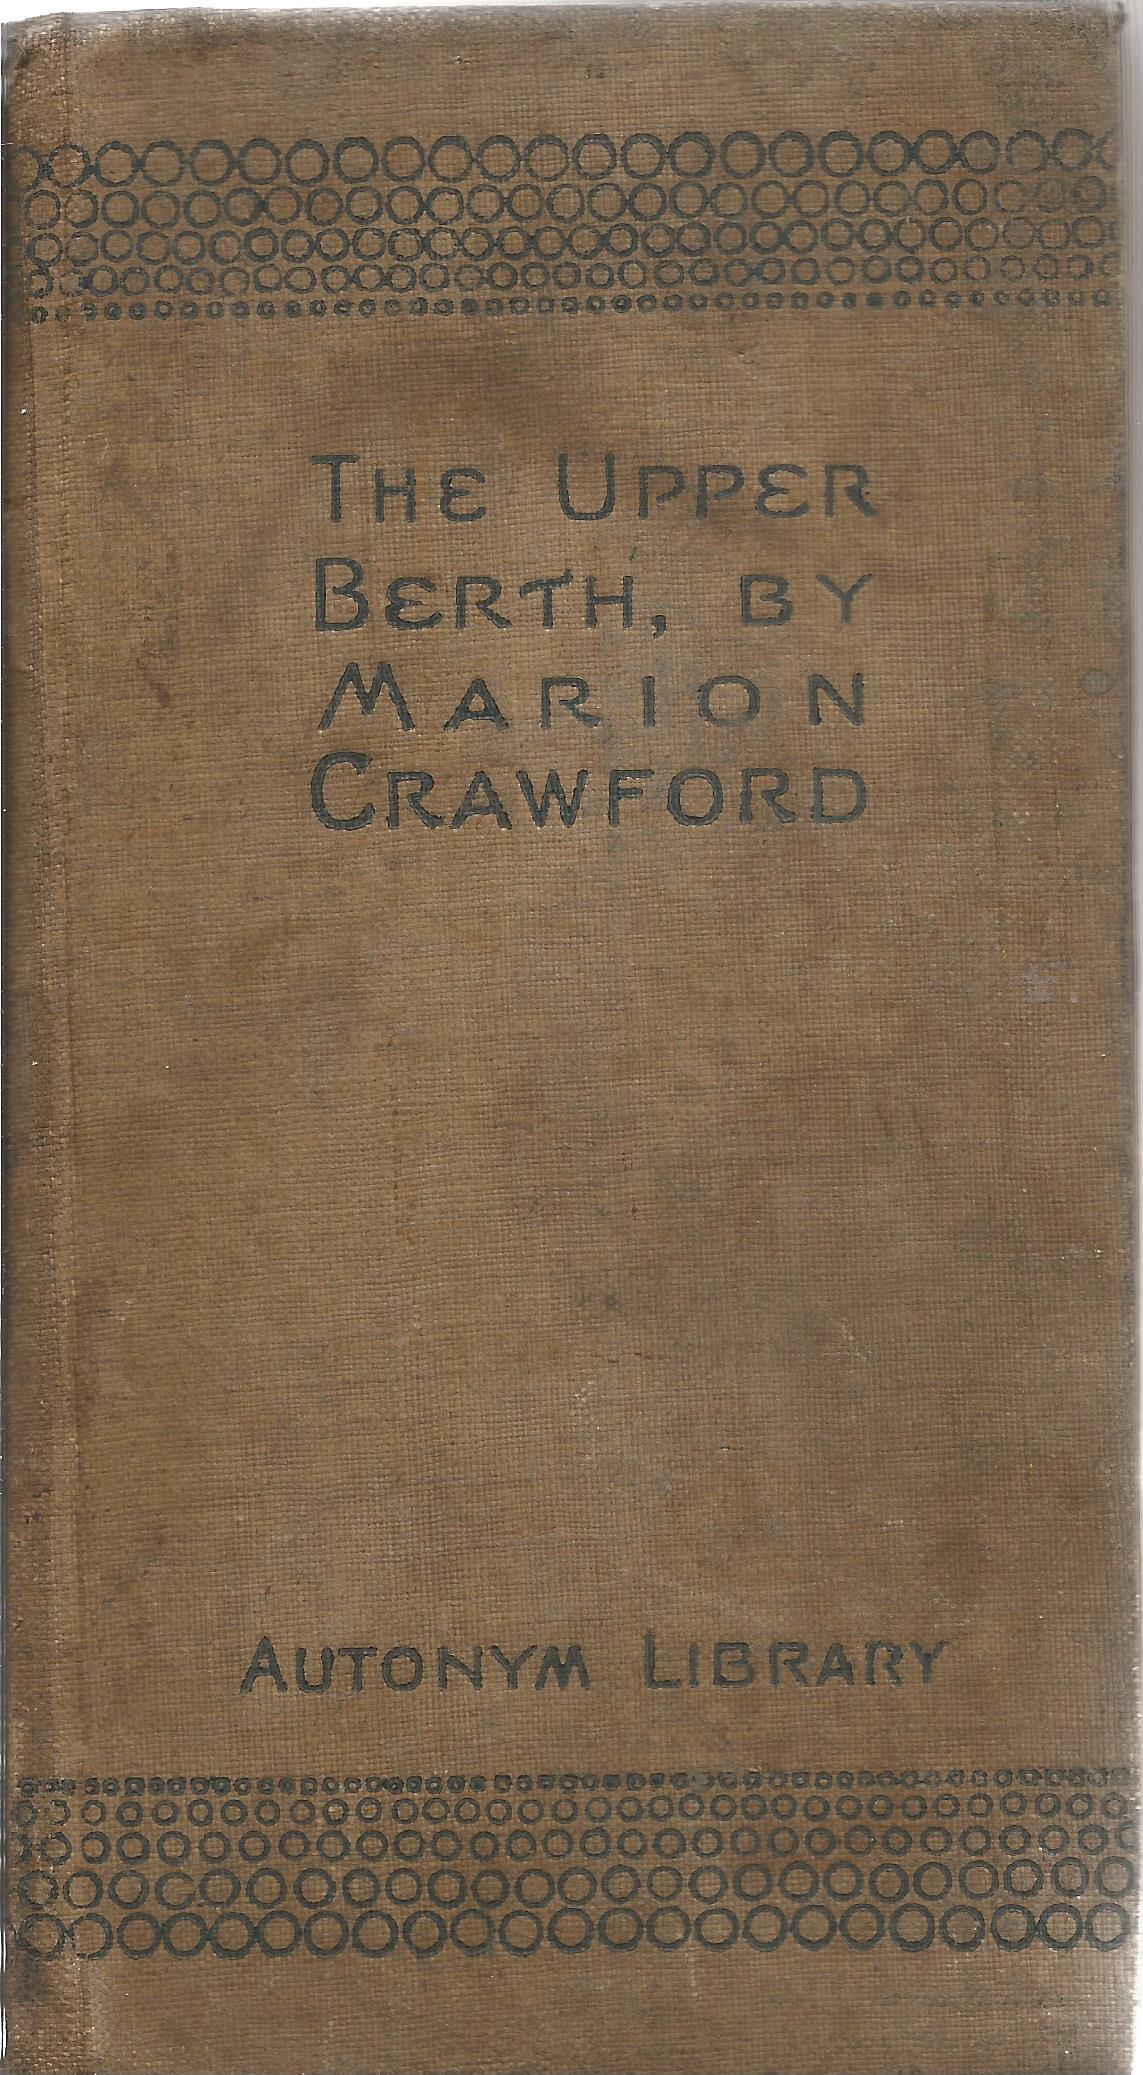 Marion Crawford Hardback Book The Upper Berth signed by the Author on the Title Page some foxing and